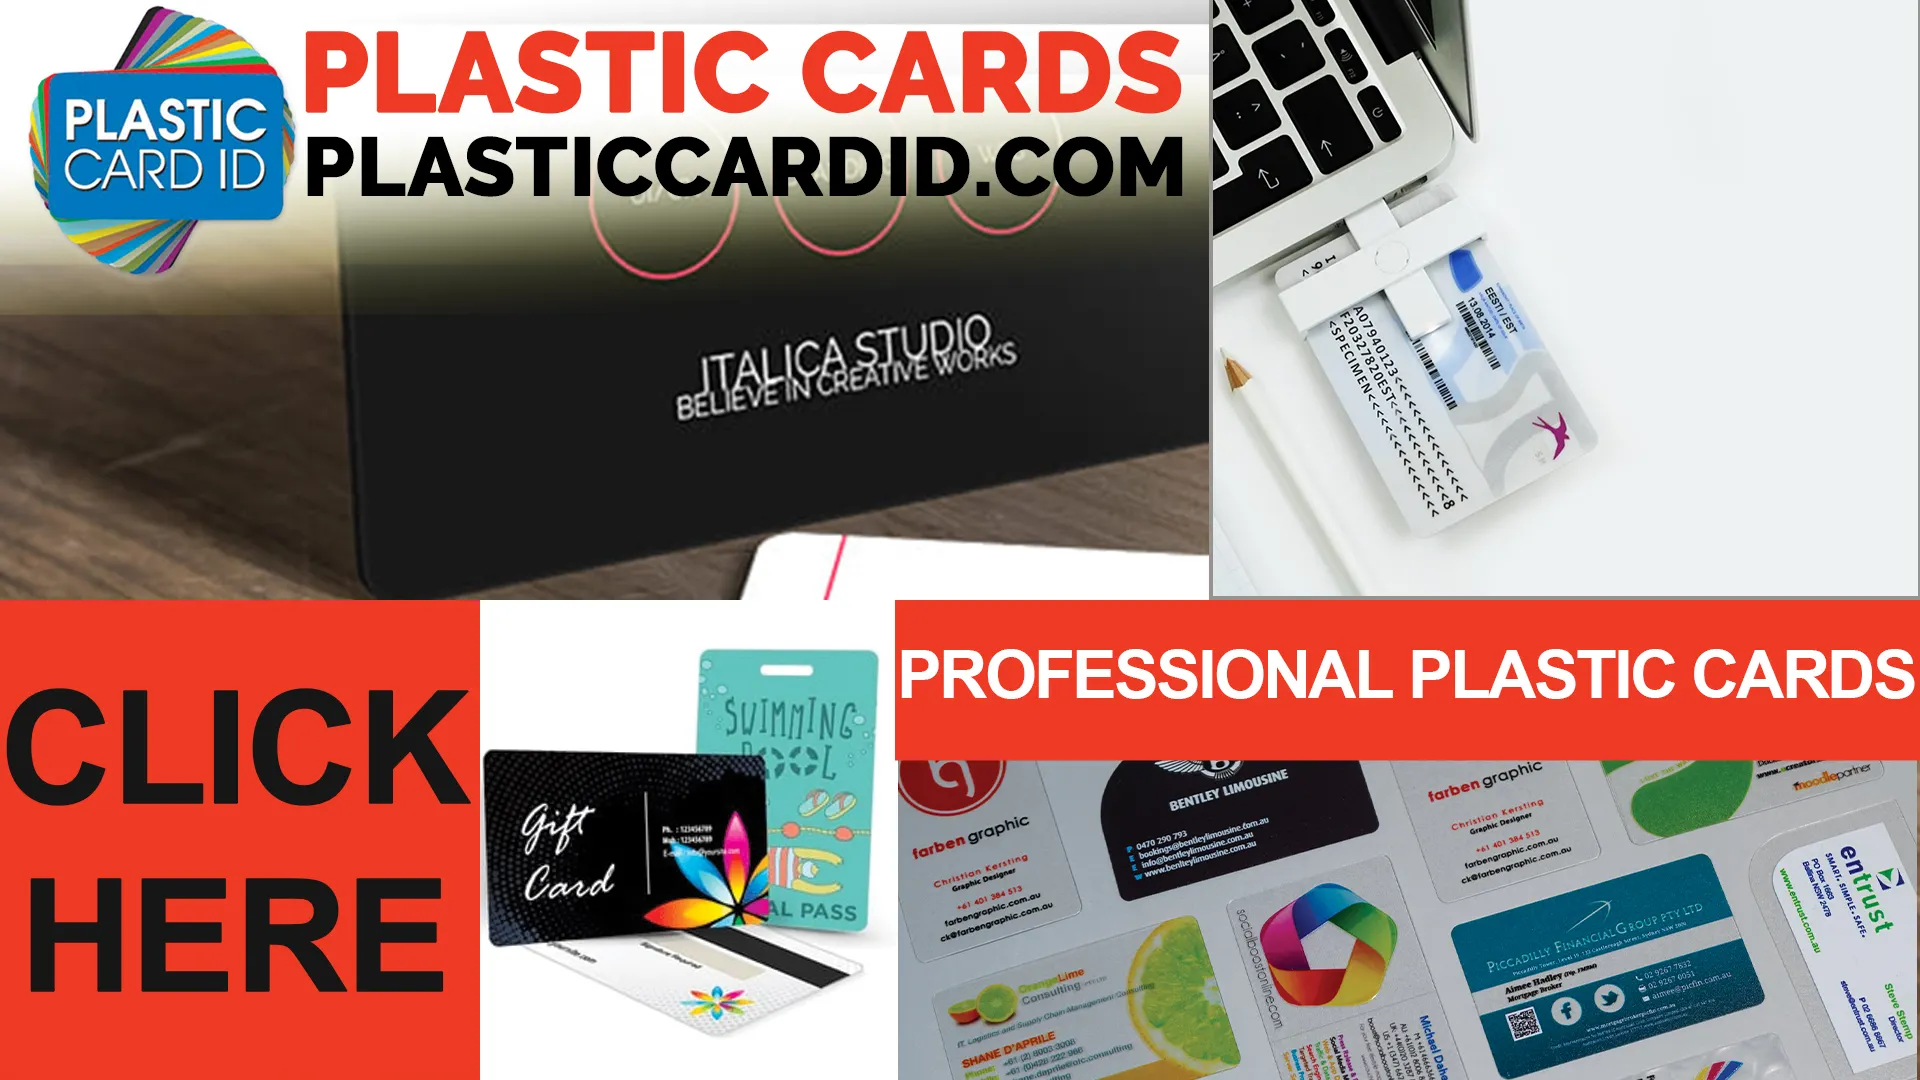 What Makes Biodegradable Plastic Cards The Future?